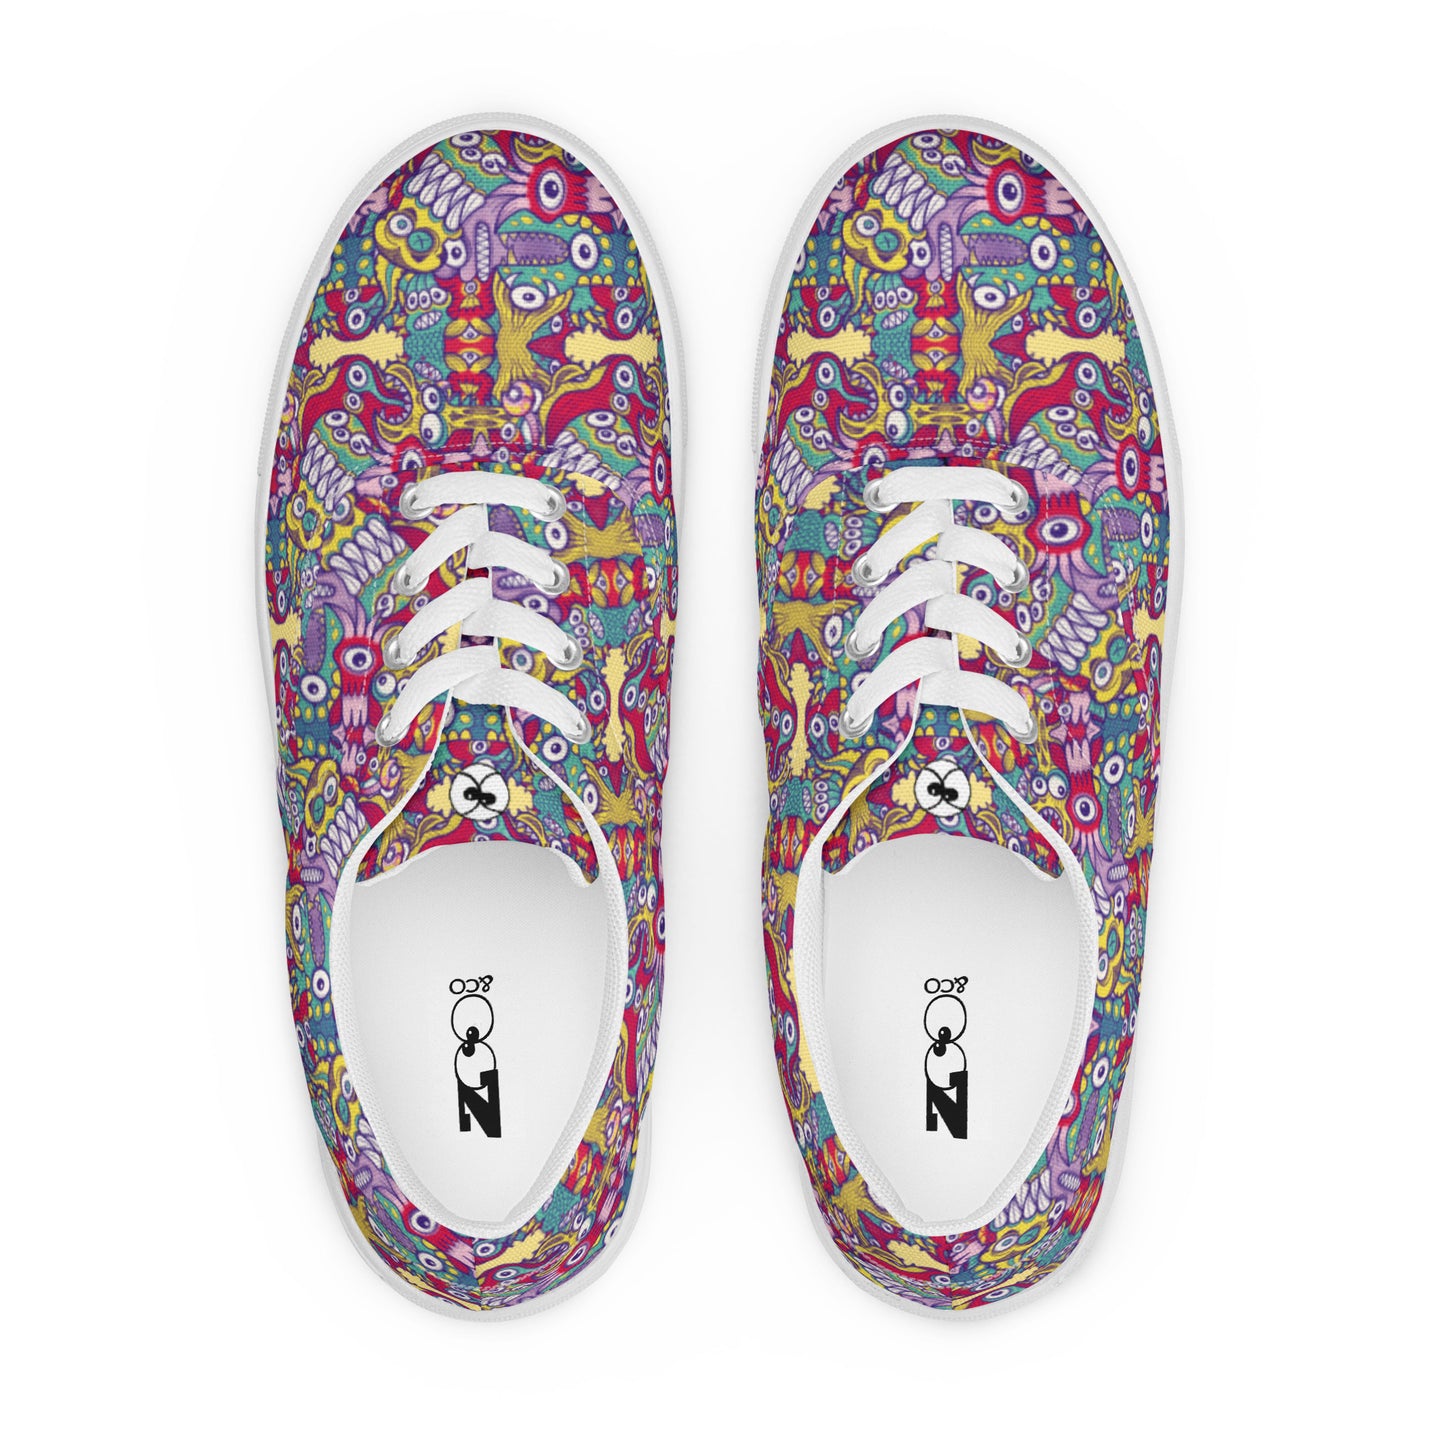 Exquisite corpse of doodles in a pattern design Men’s lace-up canvas shoes. Top view